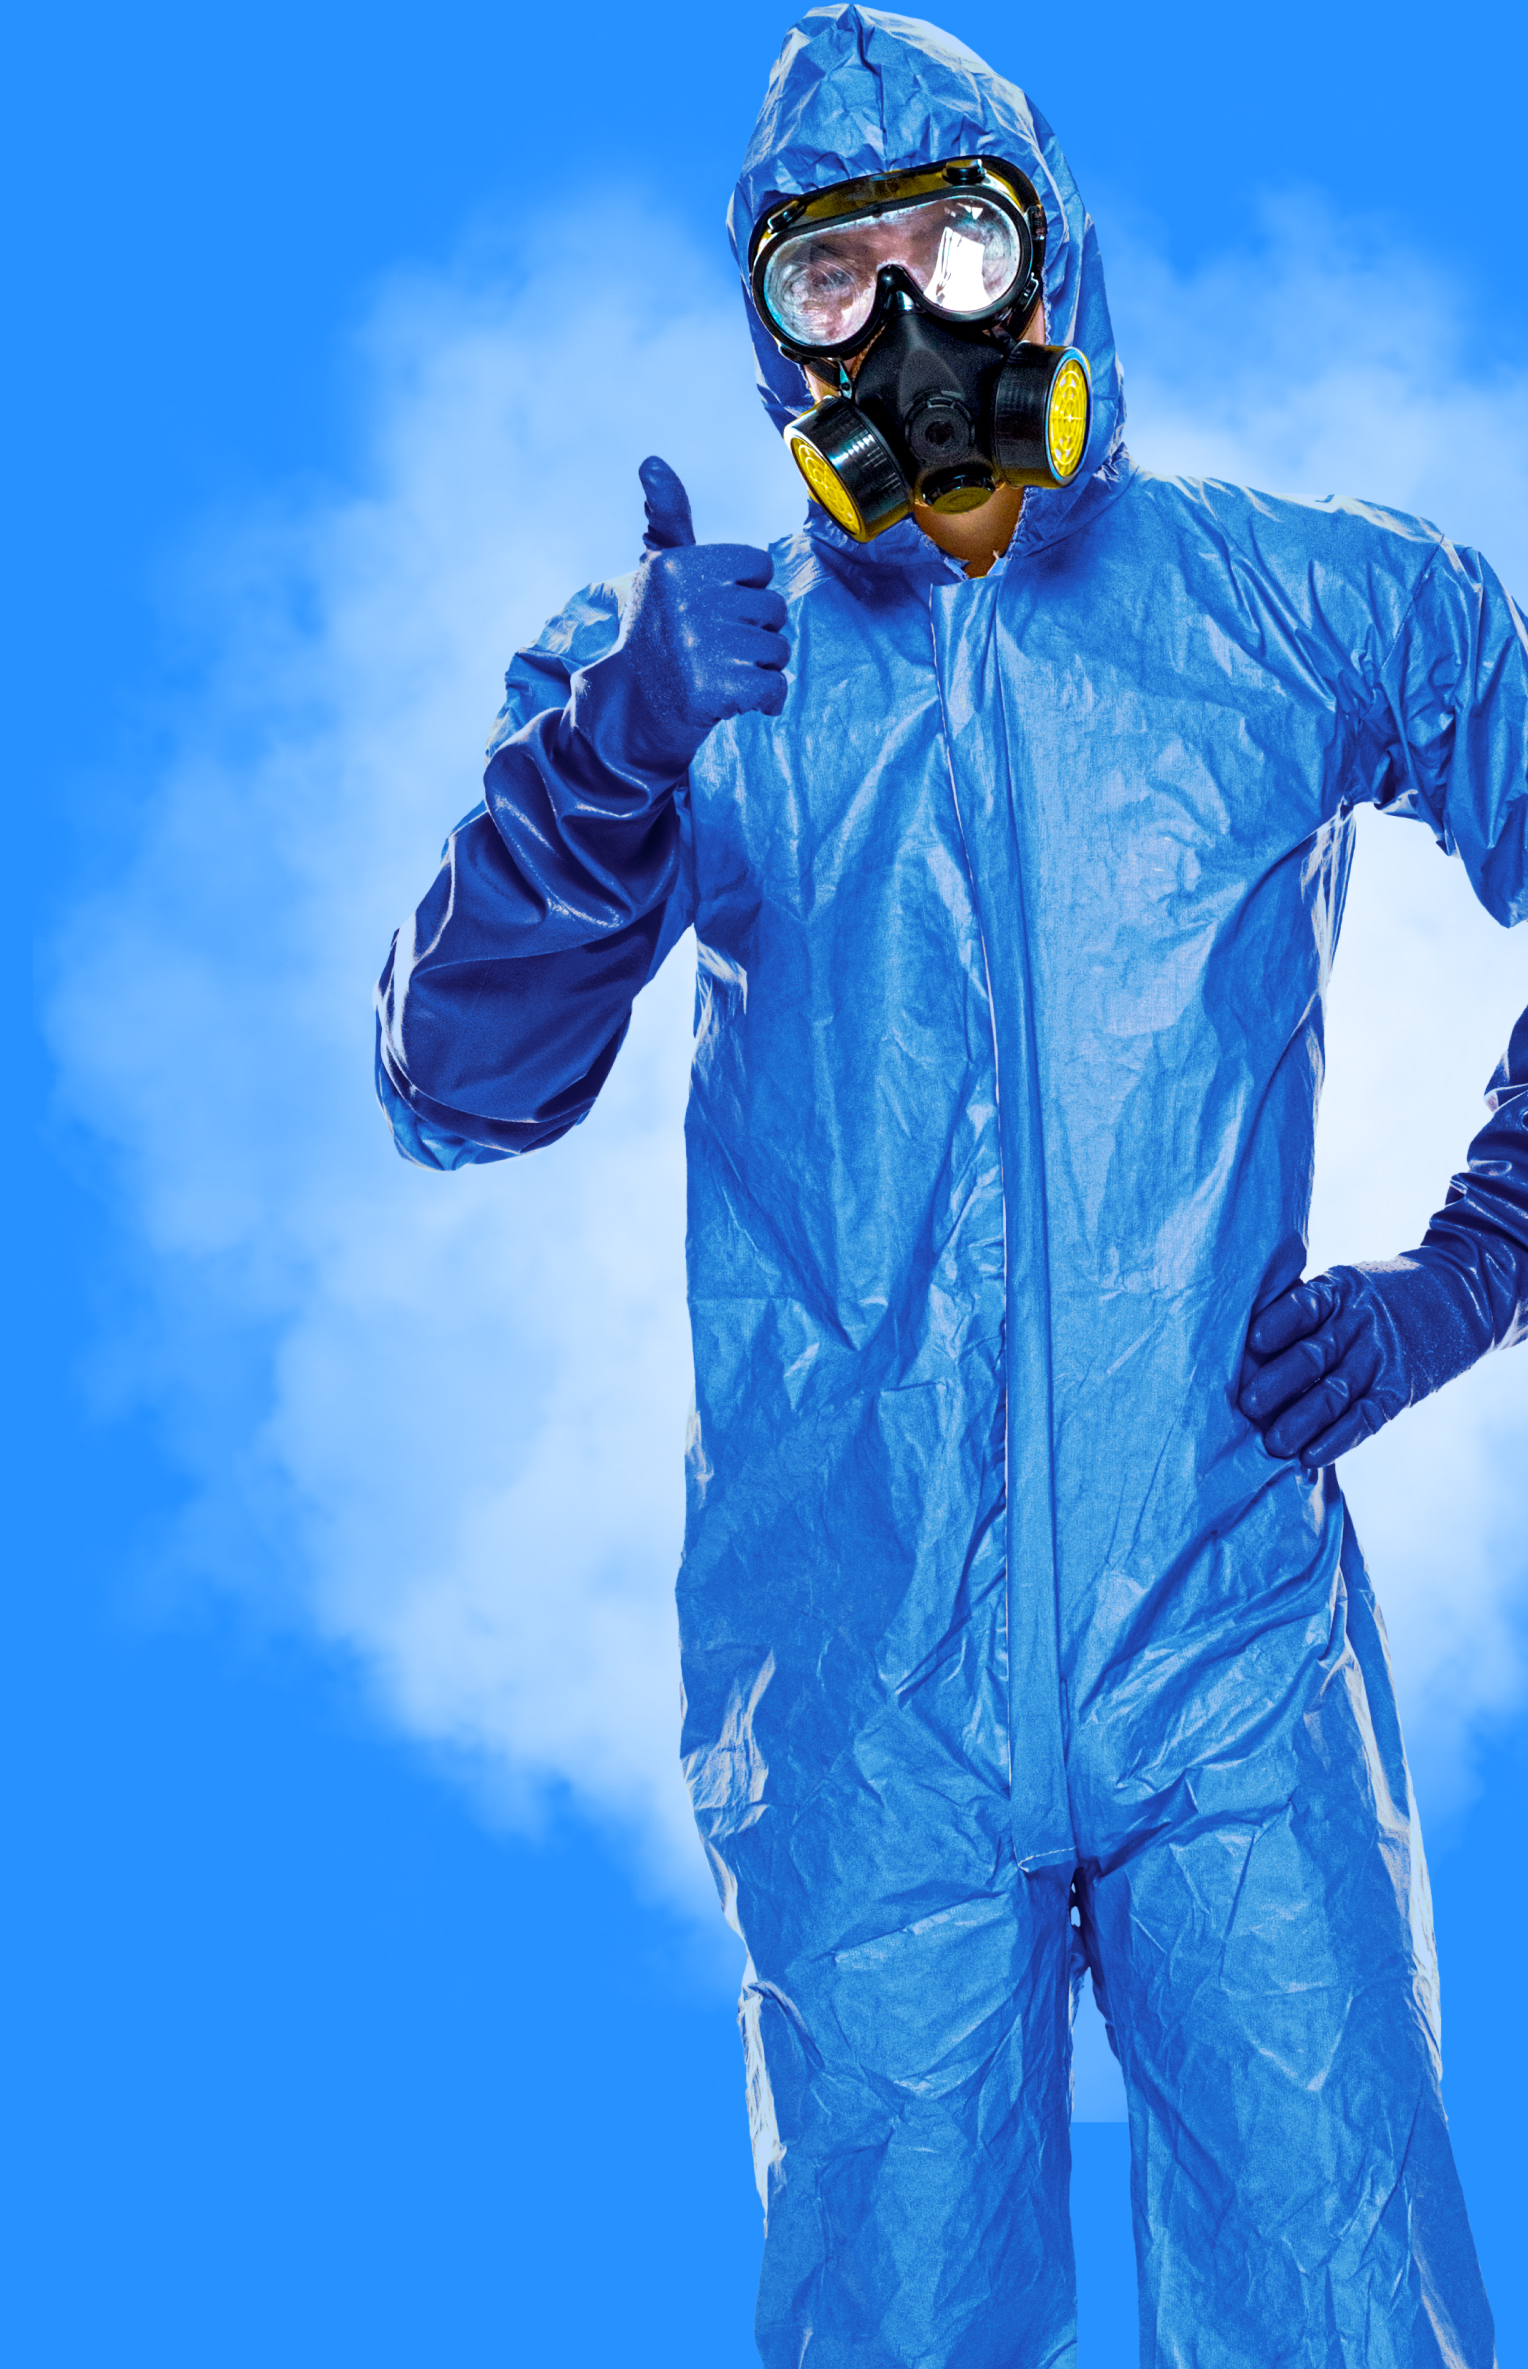 man in a hazmat suit giving a thumbs up